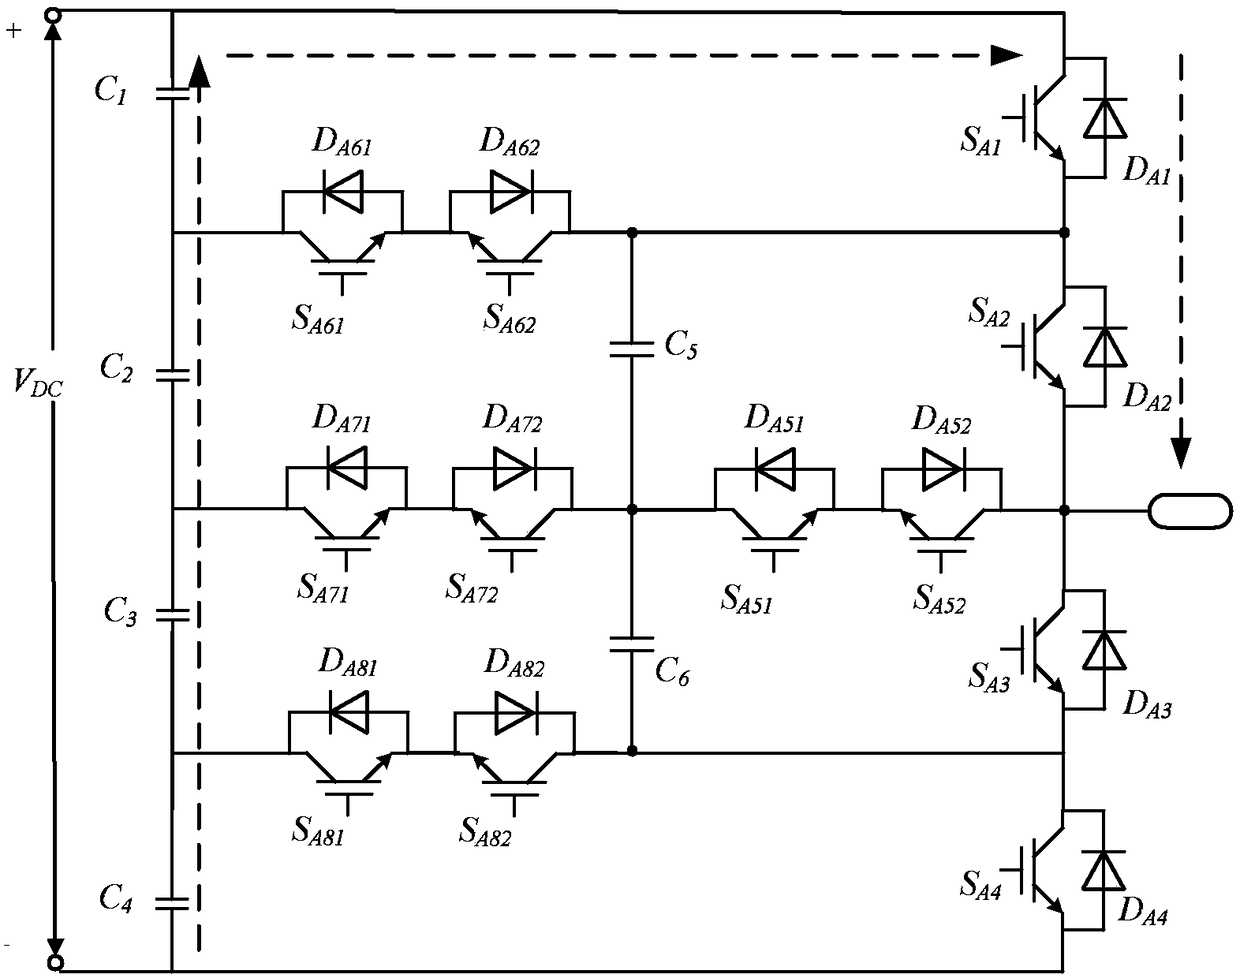 Five-level topological structure used for power conversion system